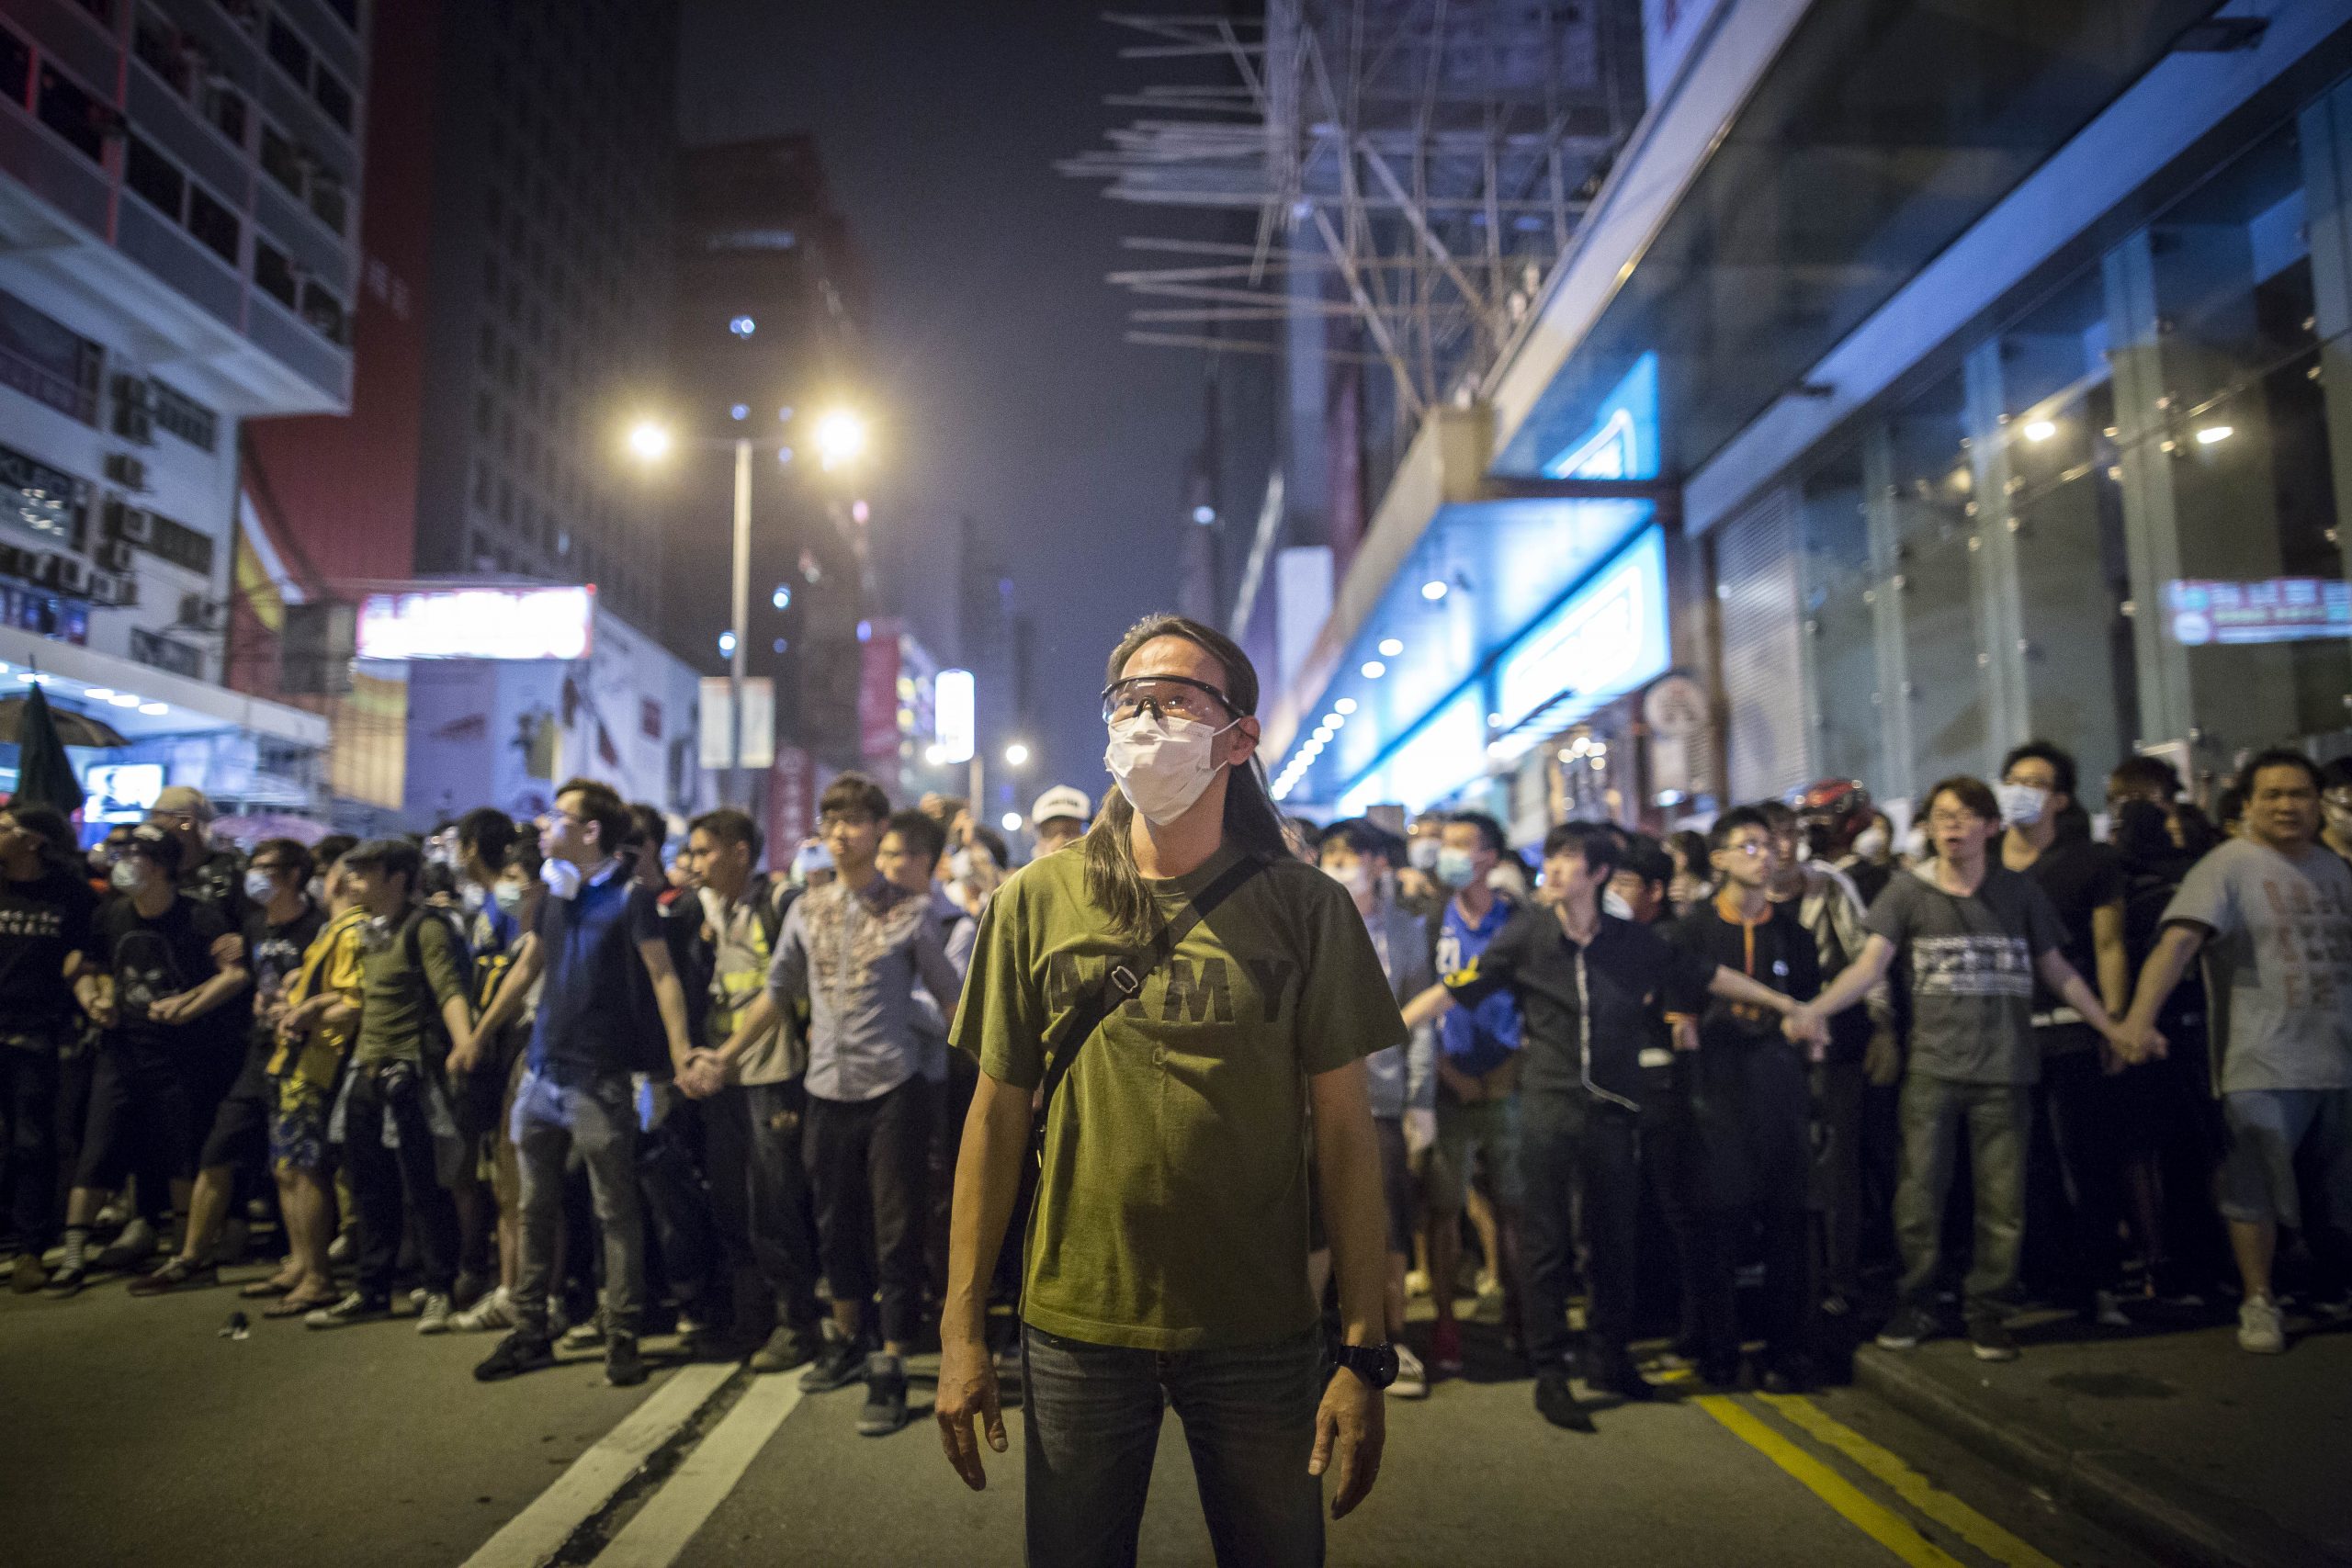 We must raise our voice for Hong Kong